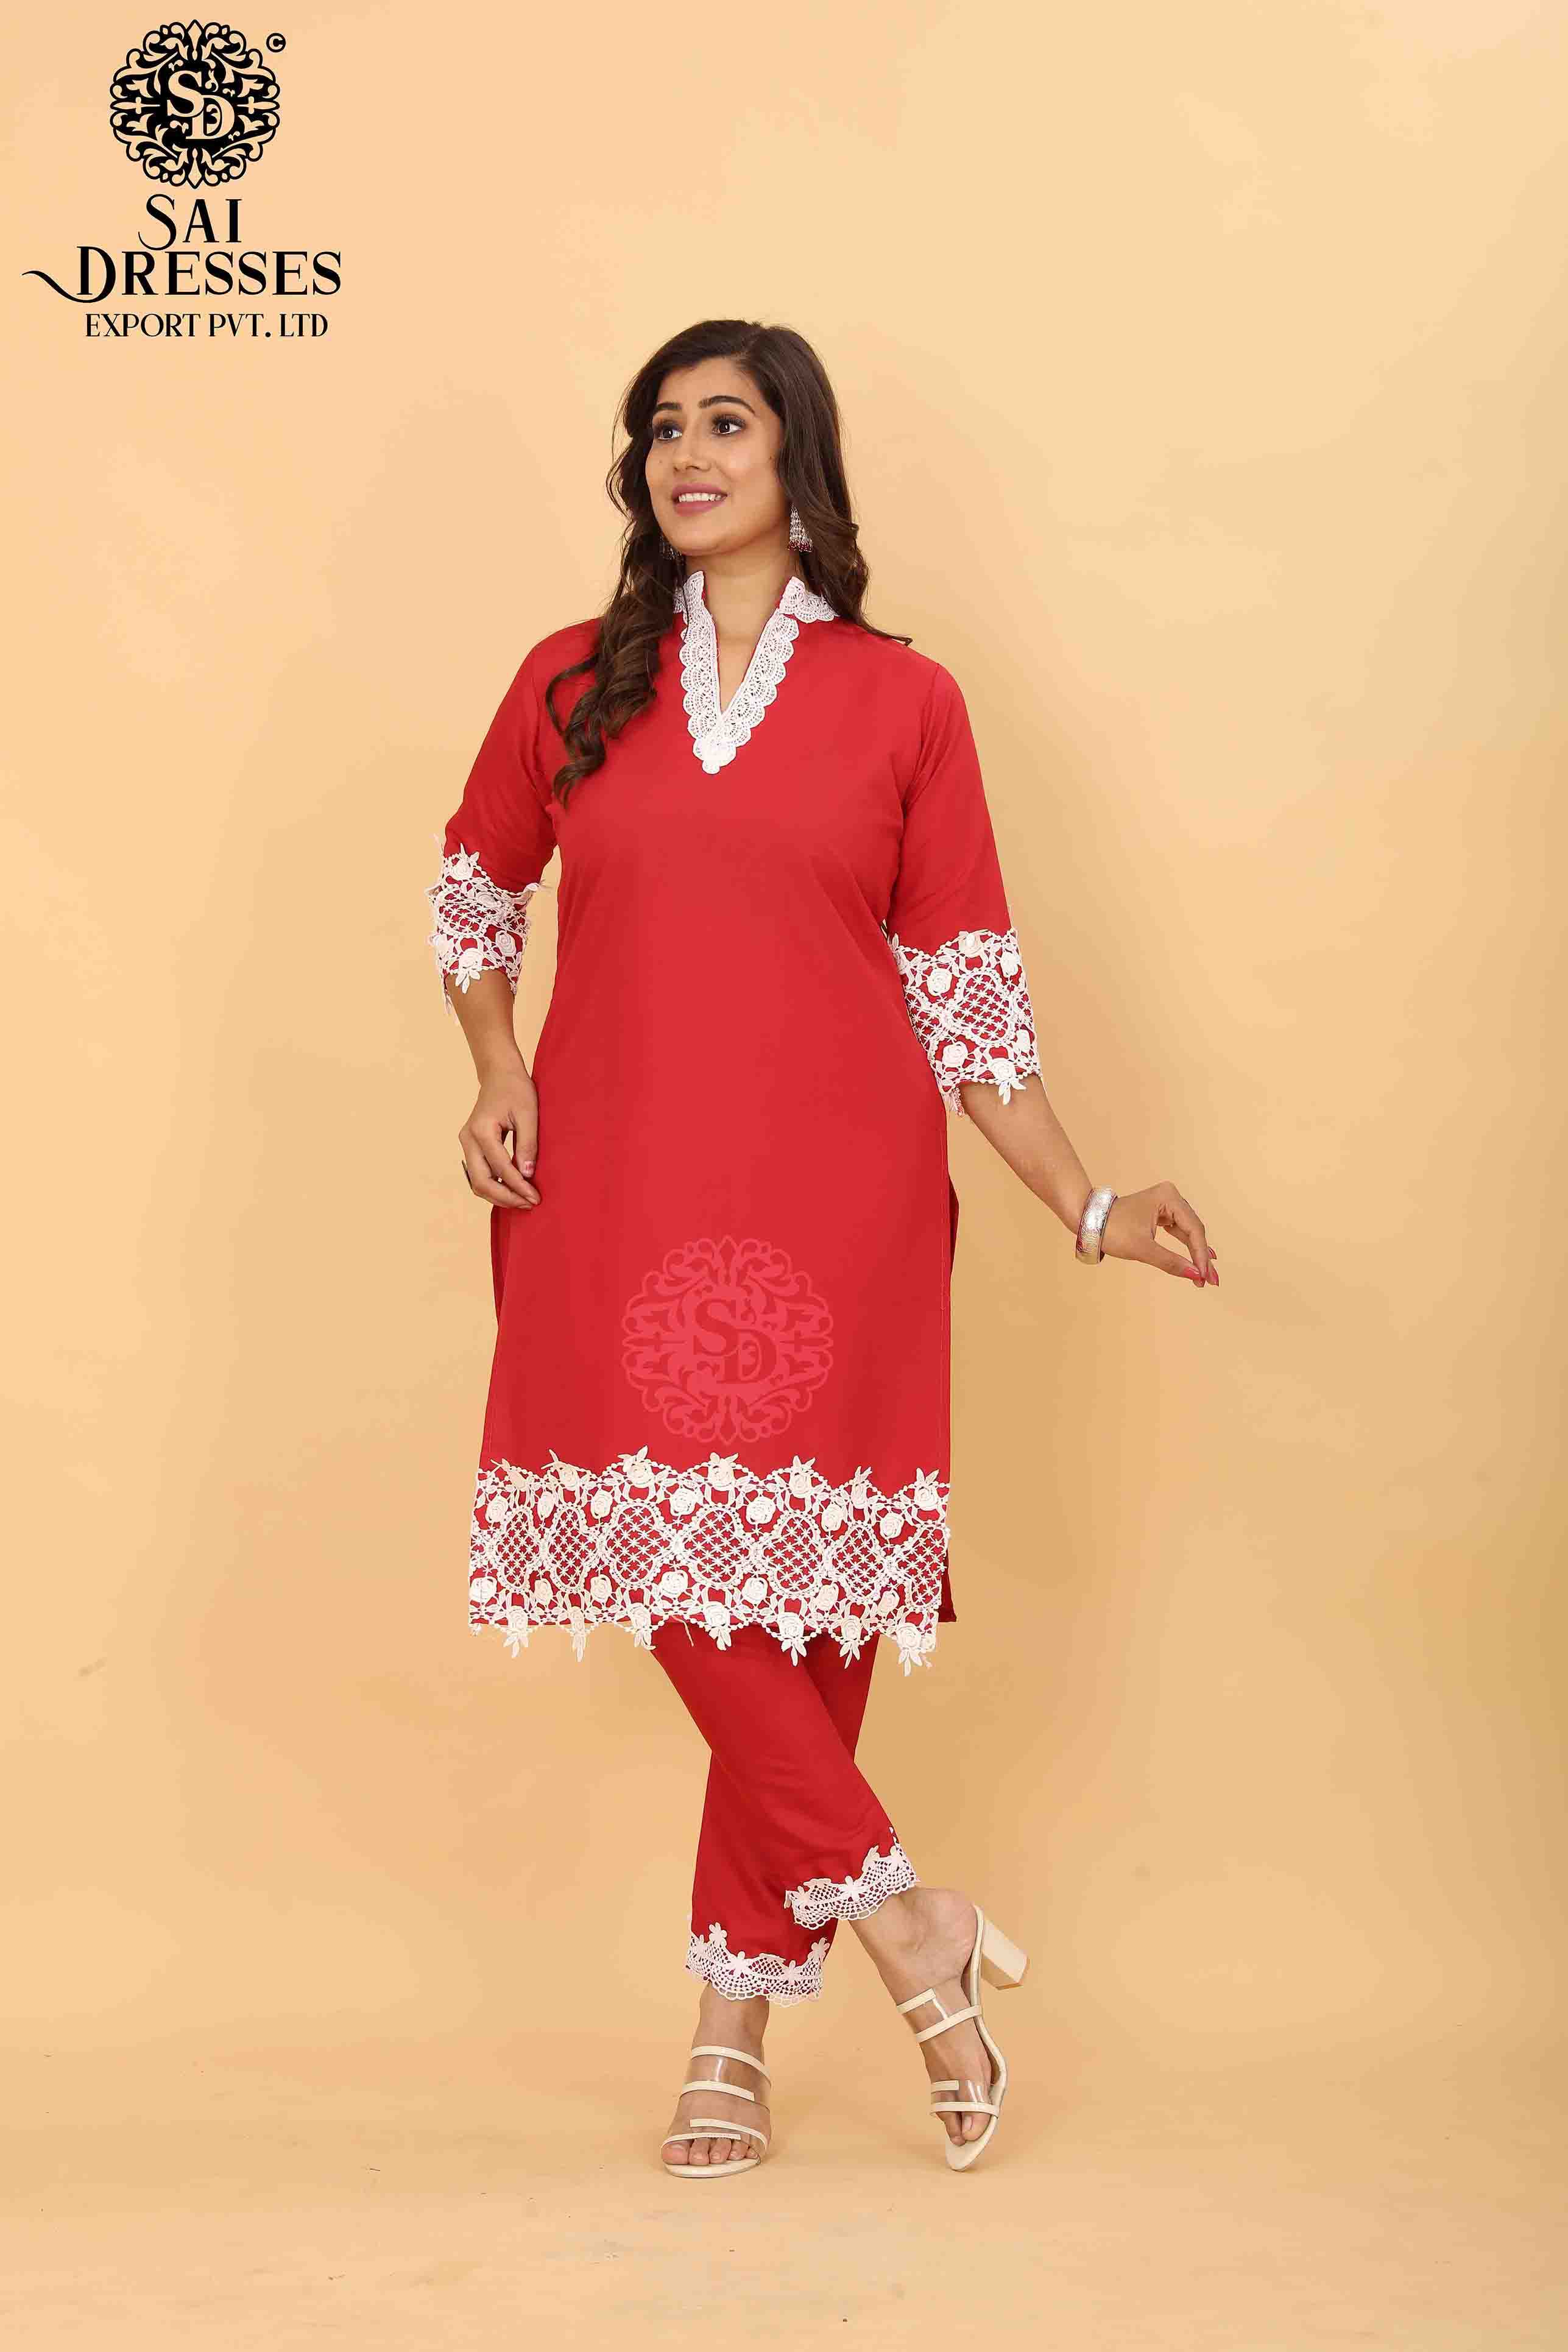 SAI DRESSES PRESENT D.NO SD 5003 READY TO TRENDY WEAR ROMAN SILK DESIGNER KURTI WITH PANT COMBO COLLECTION IN WHOLESALE RATE IN SURAT